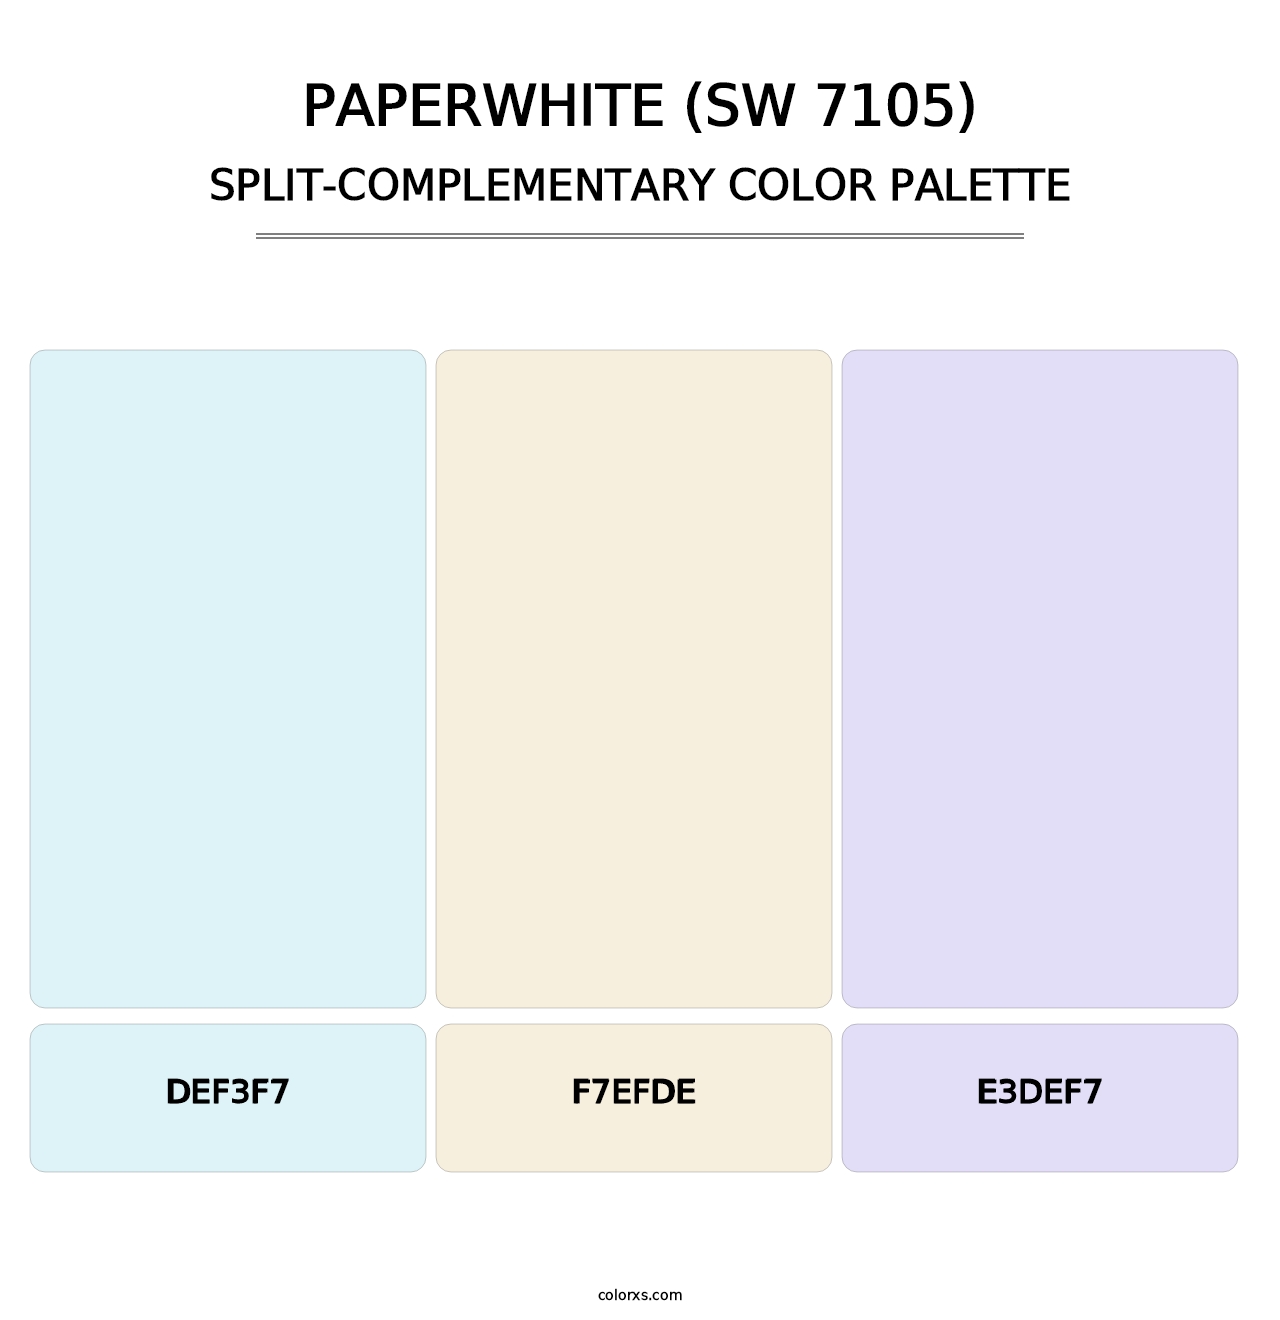 Paperwhite (SW 7105) - Split-Complementary Color Palette